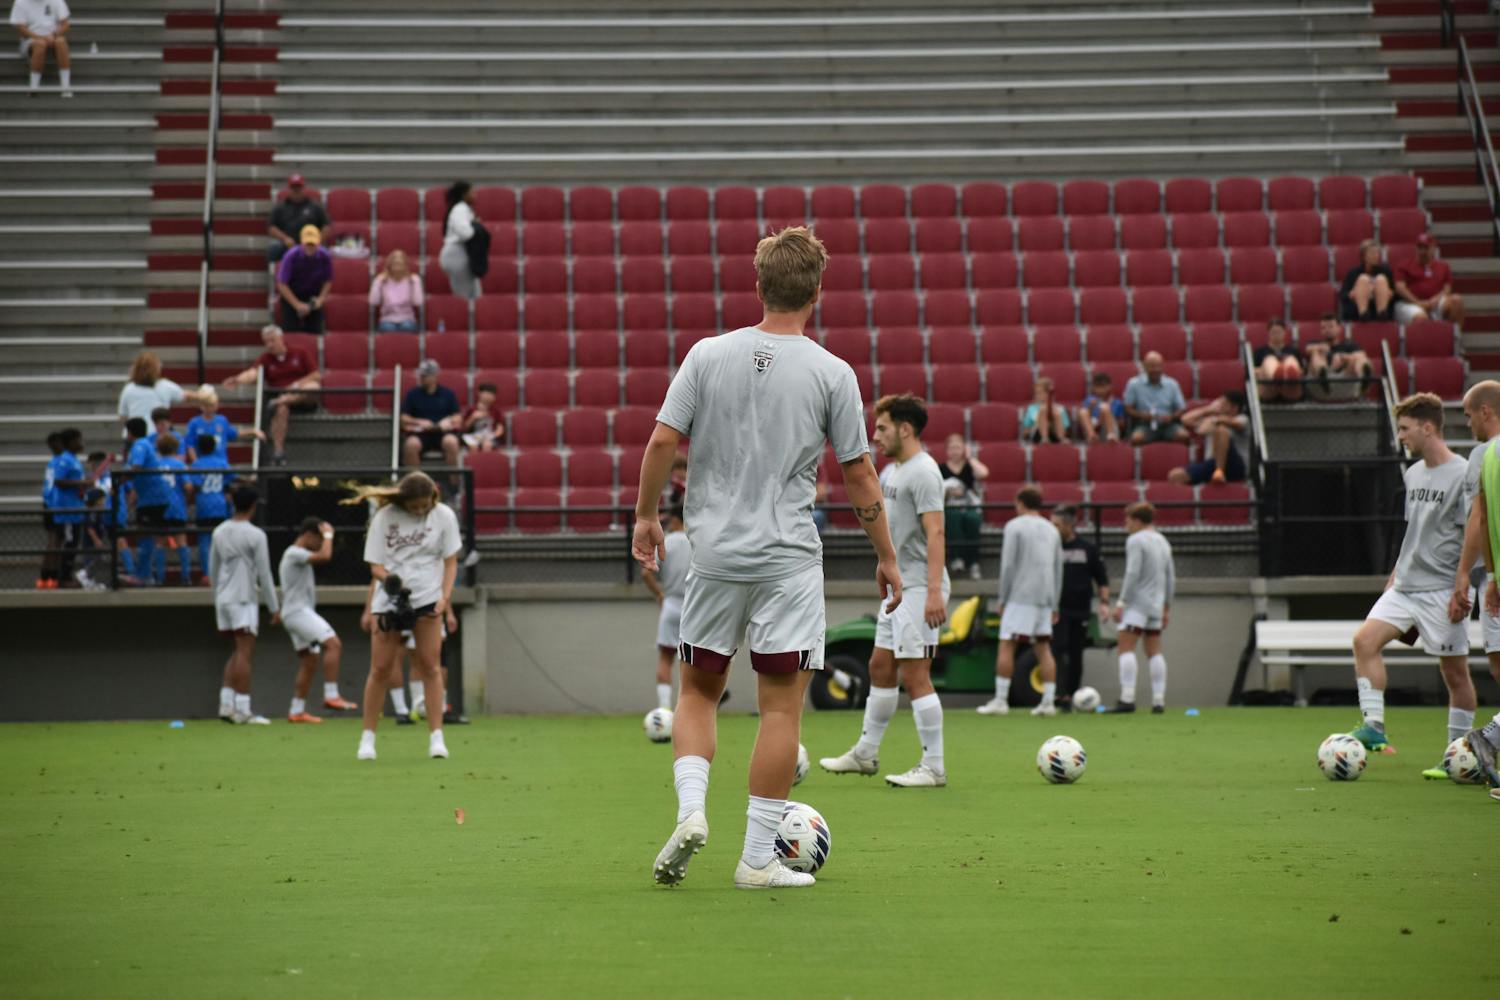 The University of South Carolina Men's soccer team warms up prior to their match against Georgia State at Stone Stadium on Sep. 23, 2023. The Gamecocks lost to the Panthers 1-0, making their season 2-4-1.&nbsp;